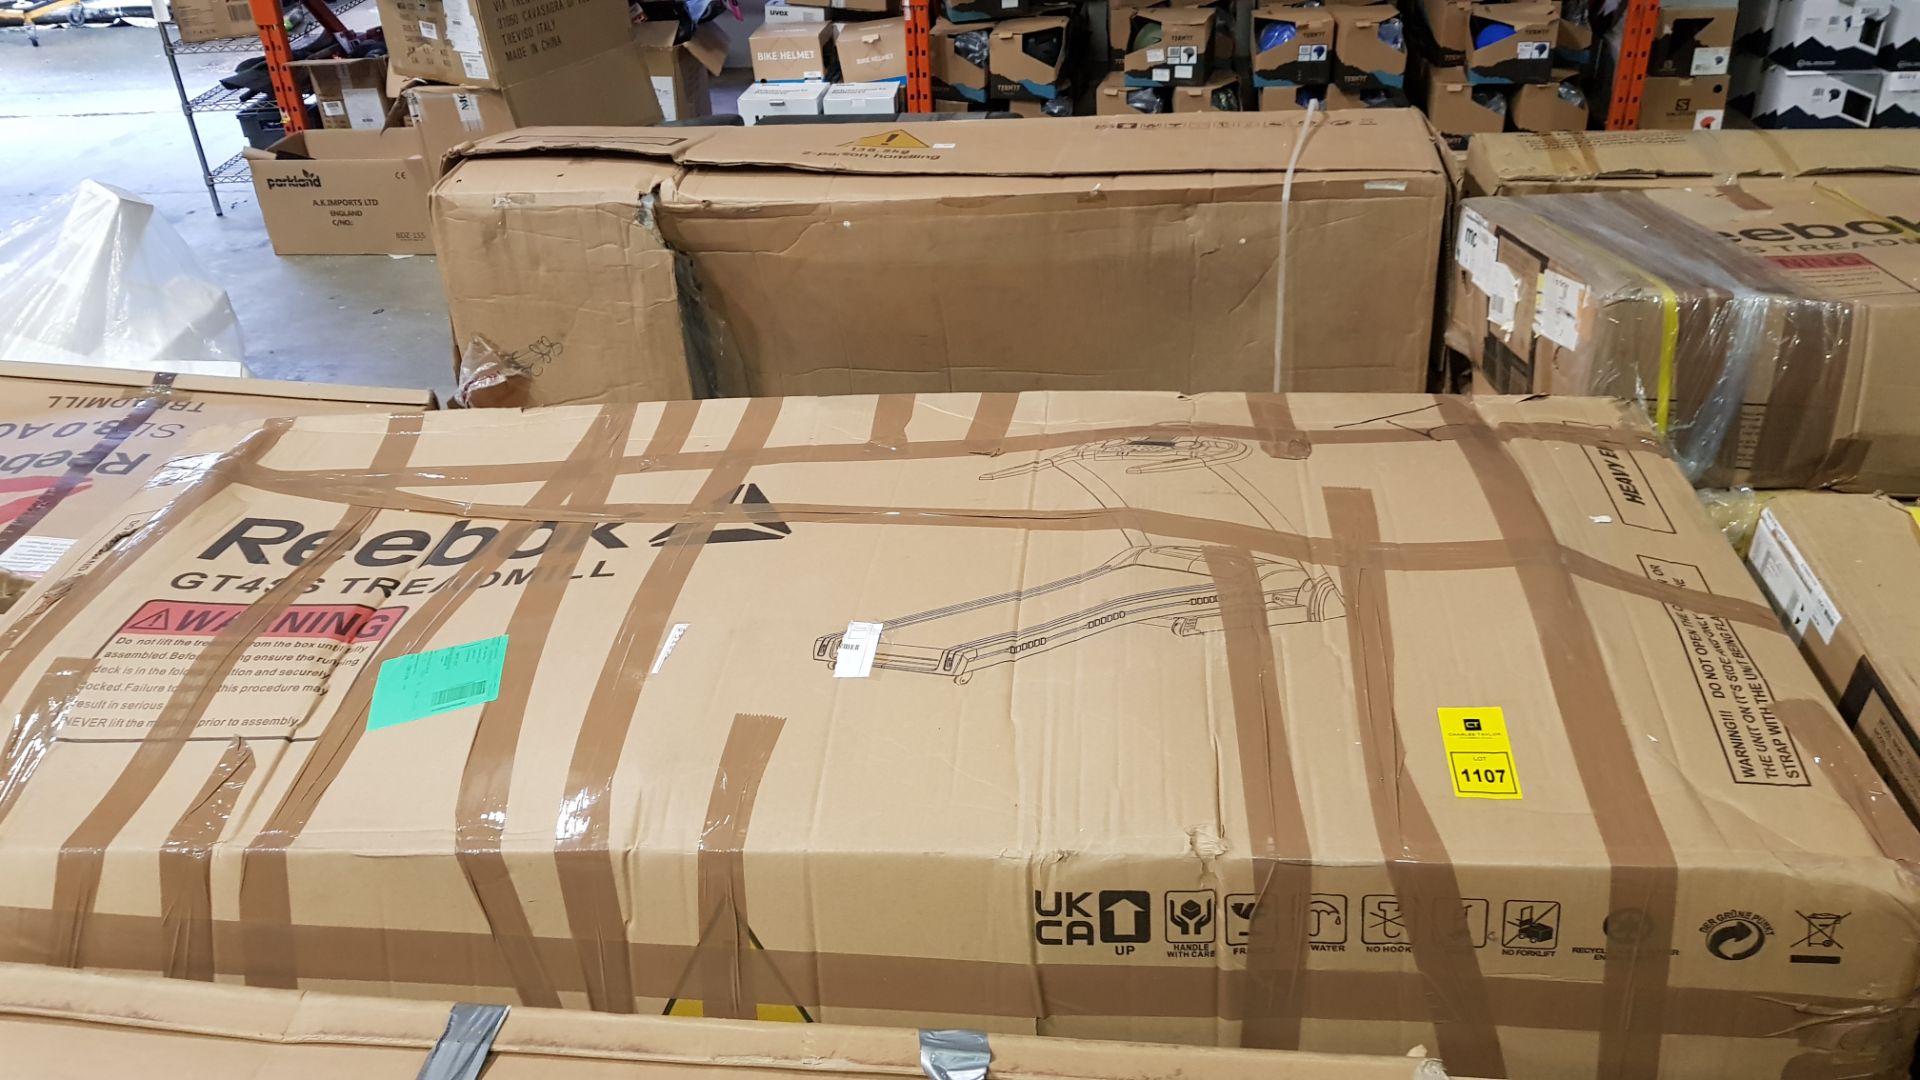 1 X BOXED REEBOK GT40S TREADMILL IN BLACK - IN 1 BOX ( PLEASE NOTE CUSTOMER RETURN AND DAMAGE ON BOX - Image 2 of 2